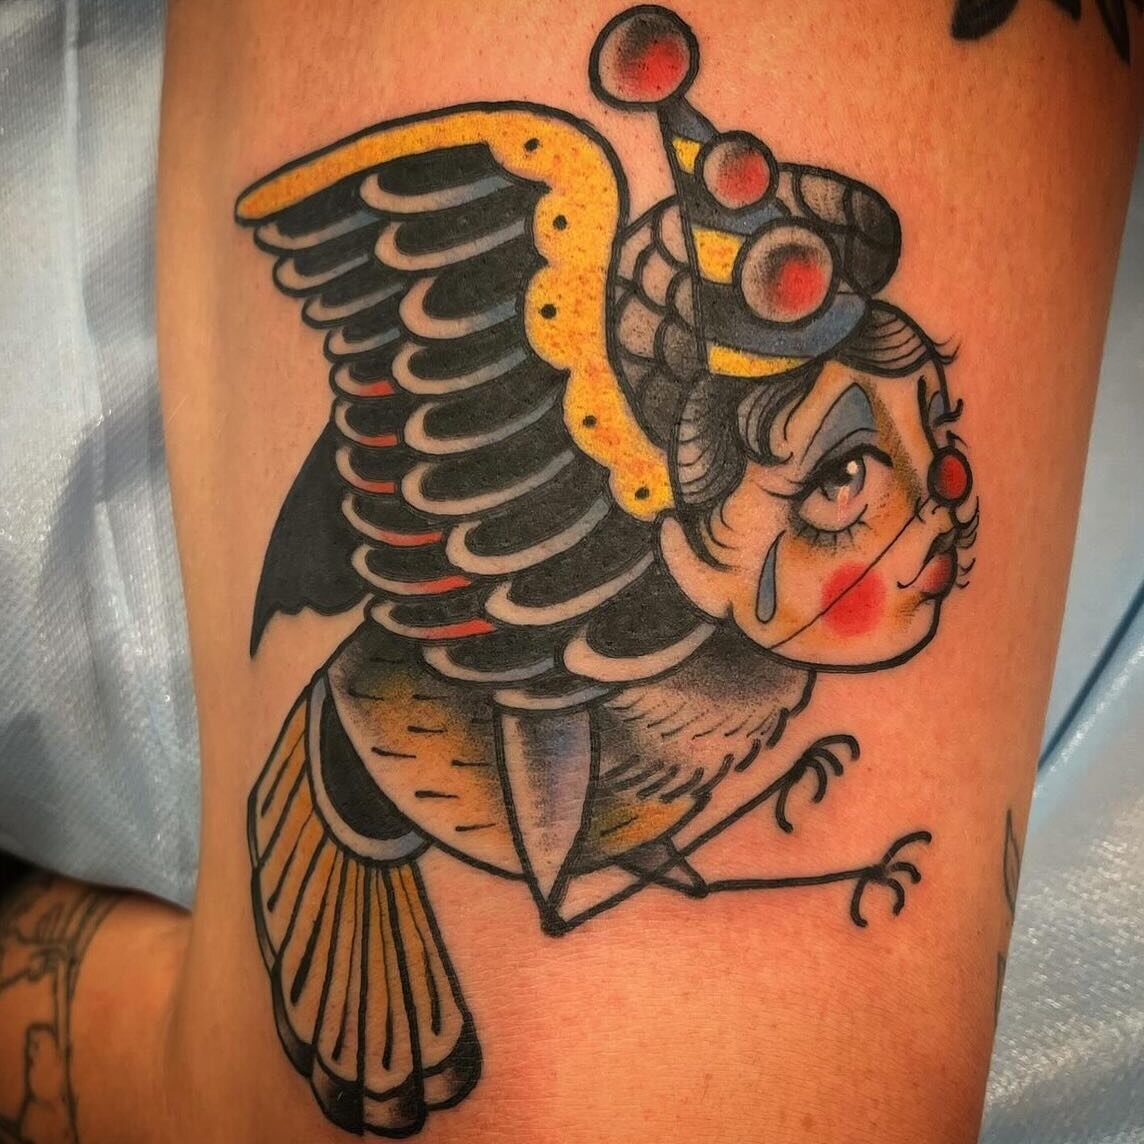 By @lovelyvomit! Contact Ashli directly for appointments and availability